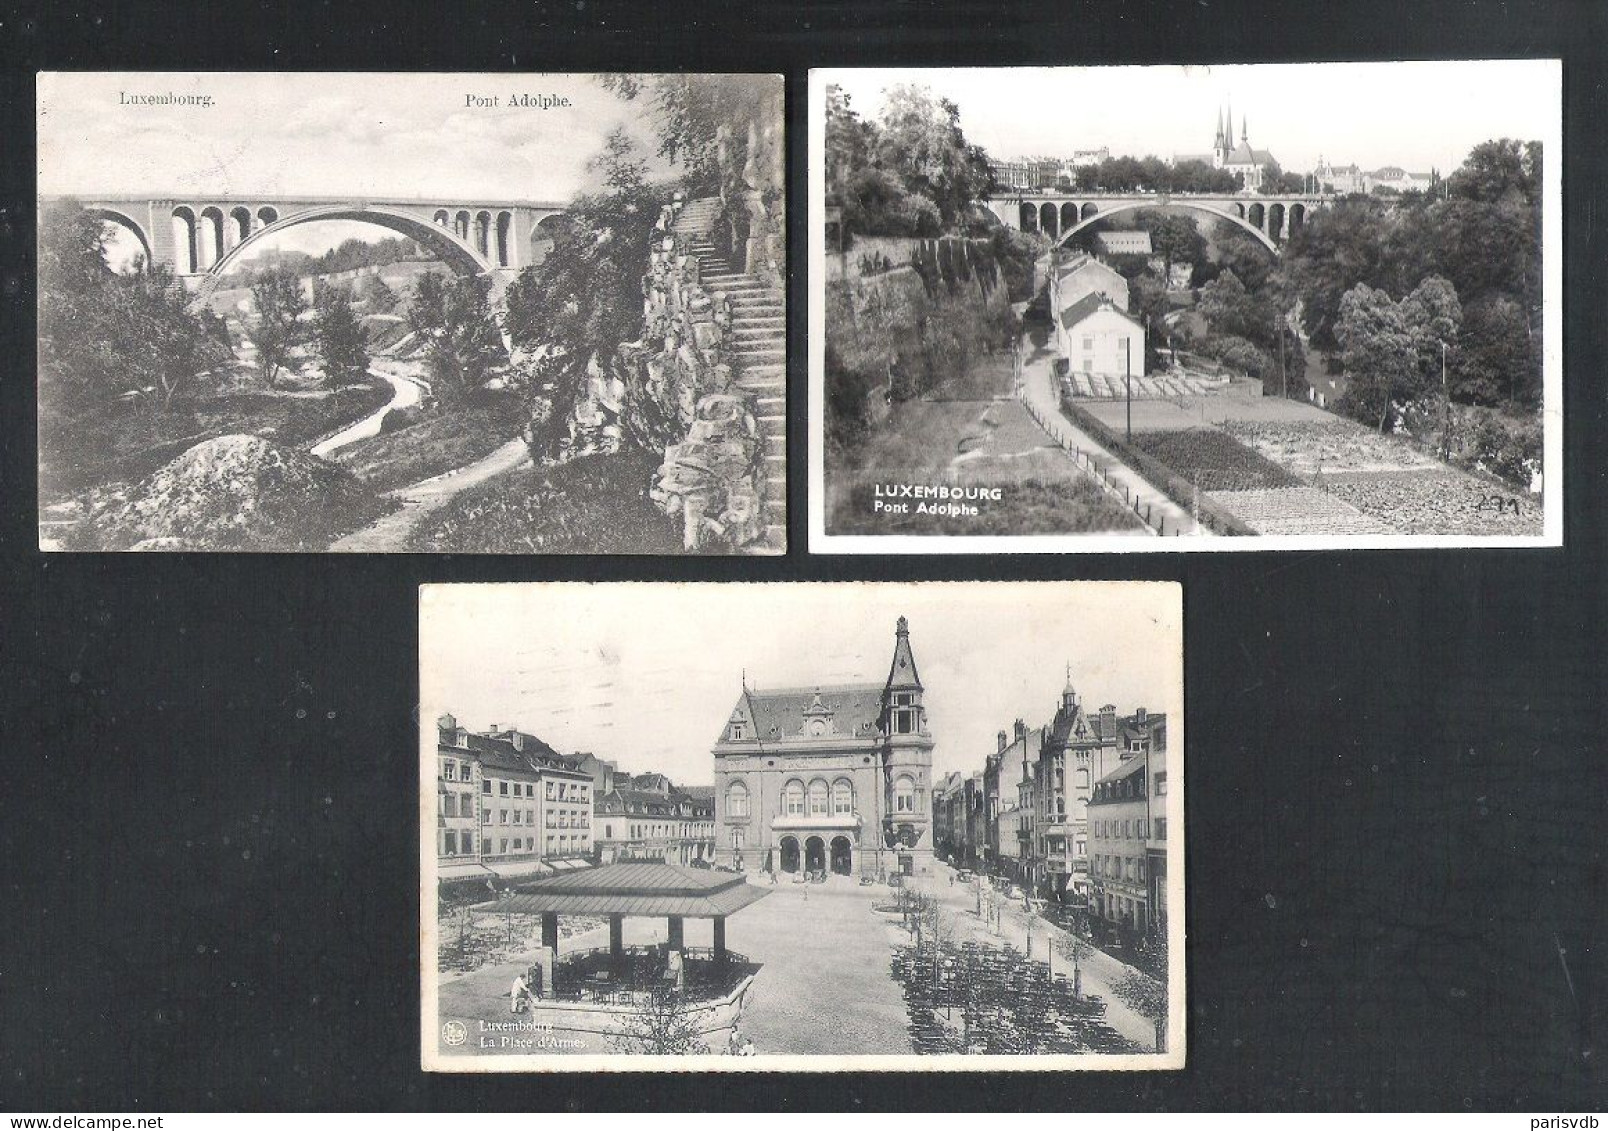 LUXEMBOURG   -  LUXEMBOURG  - 3 CPA   (L 171) - Luxemburg - Stadt